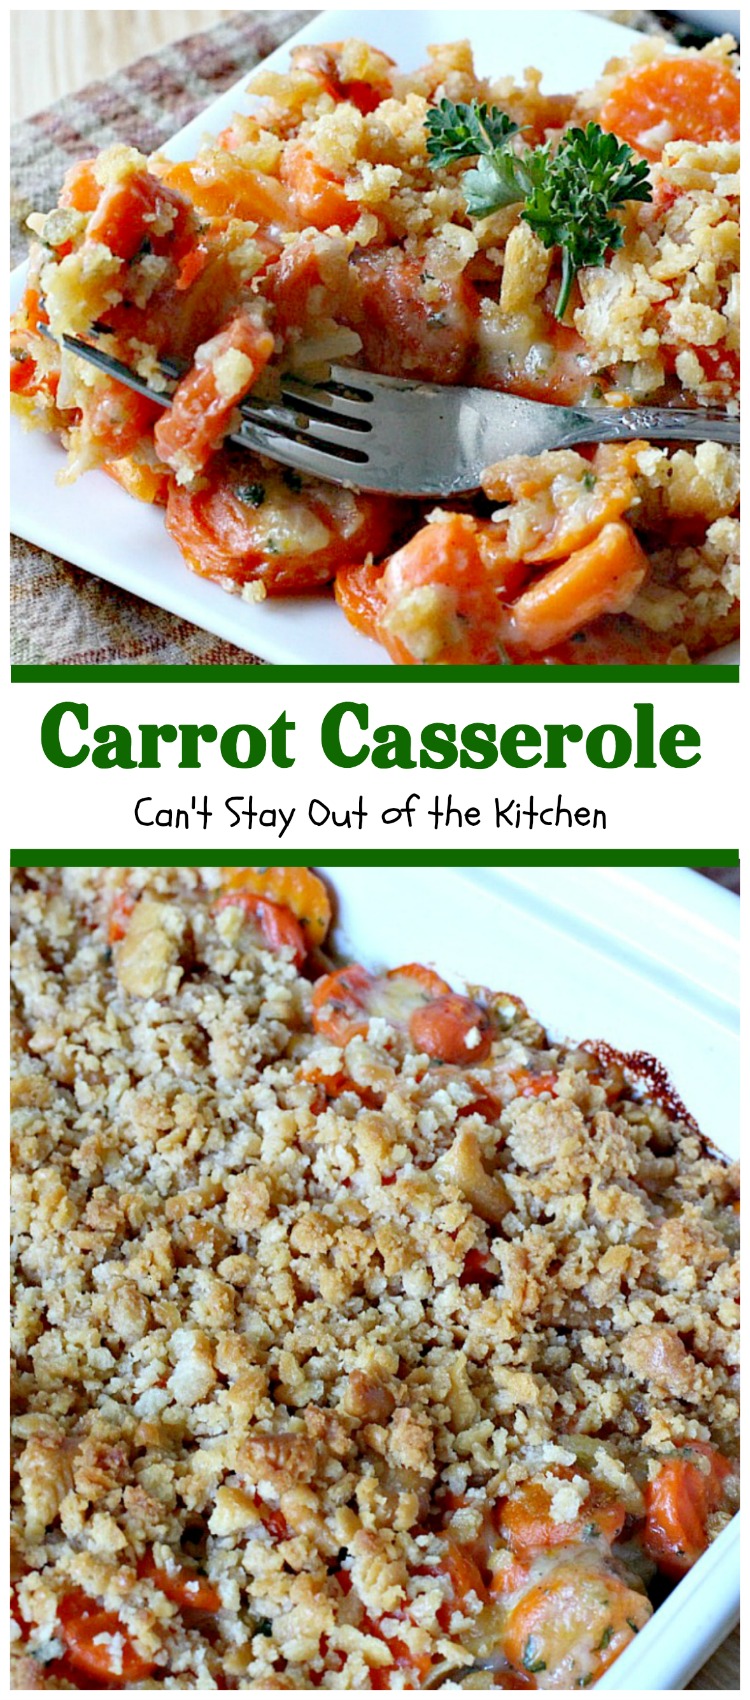 Carrot Casserole | Can't Stay Out of the Kitchen